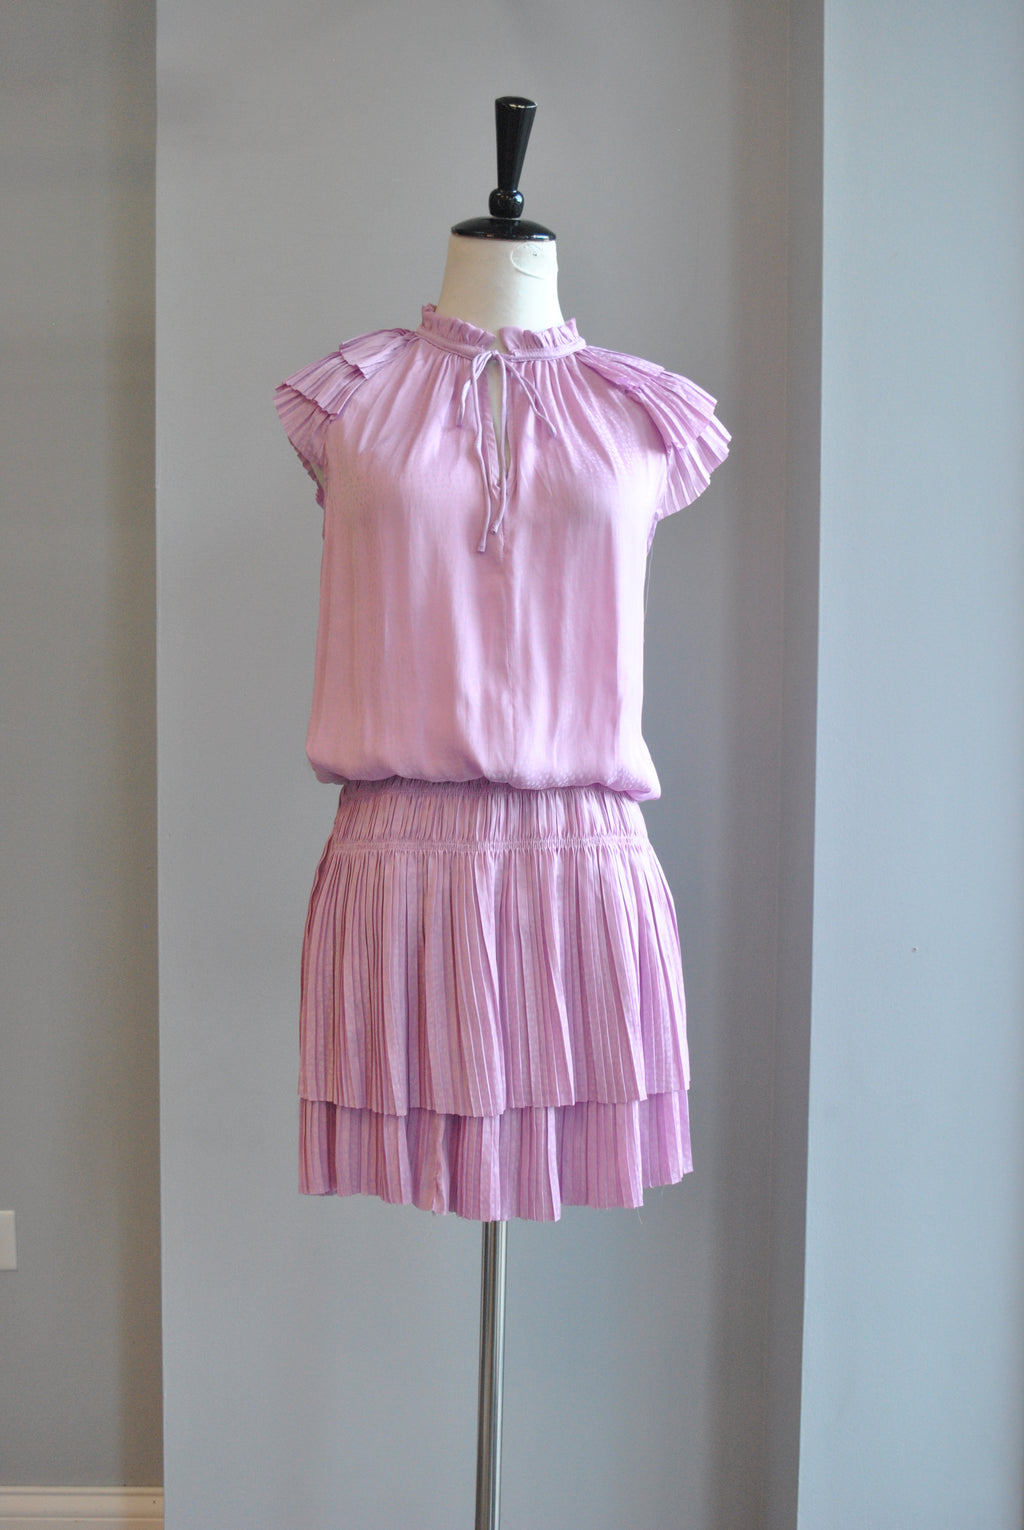 LAVENDER TUNIC STYLE DRESS WITH ELASTIC WAIST